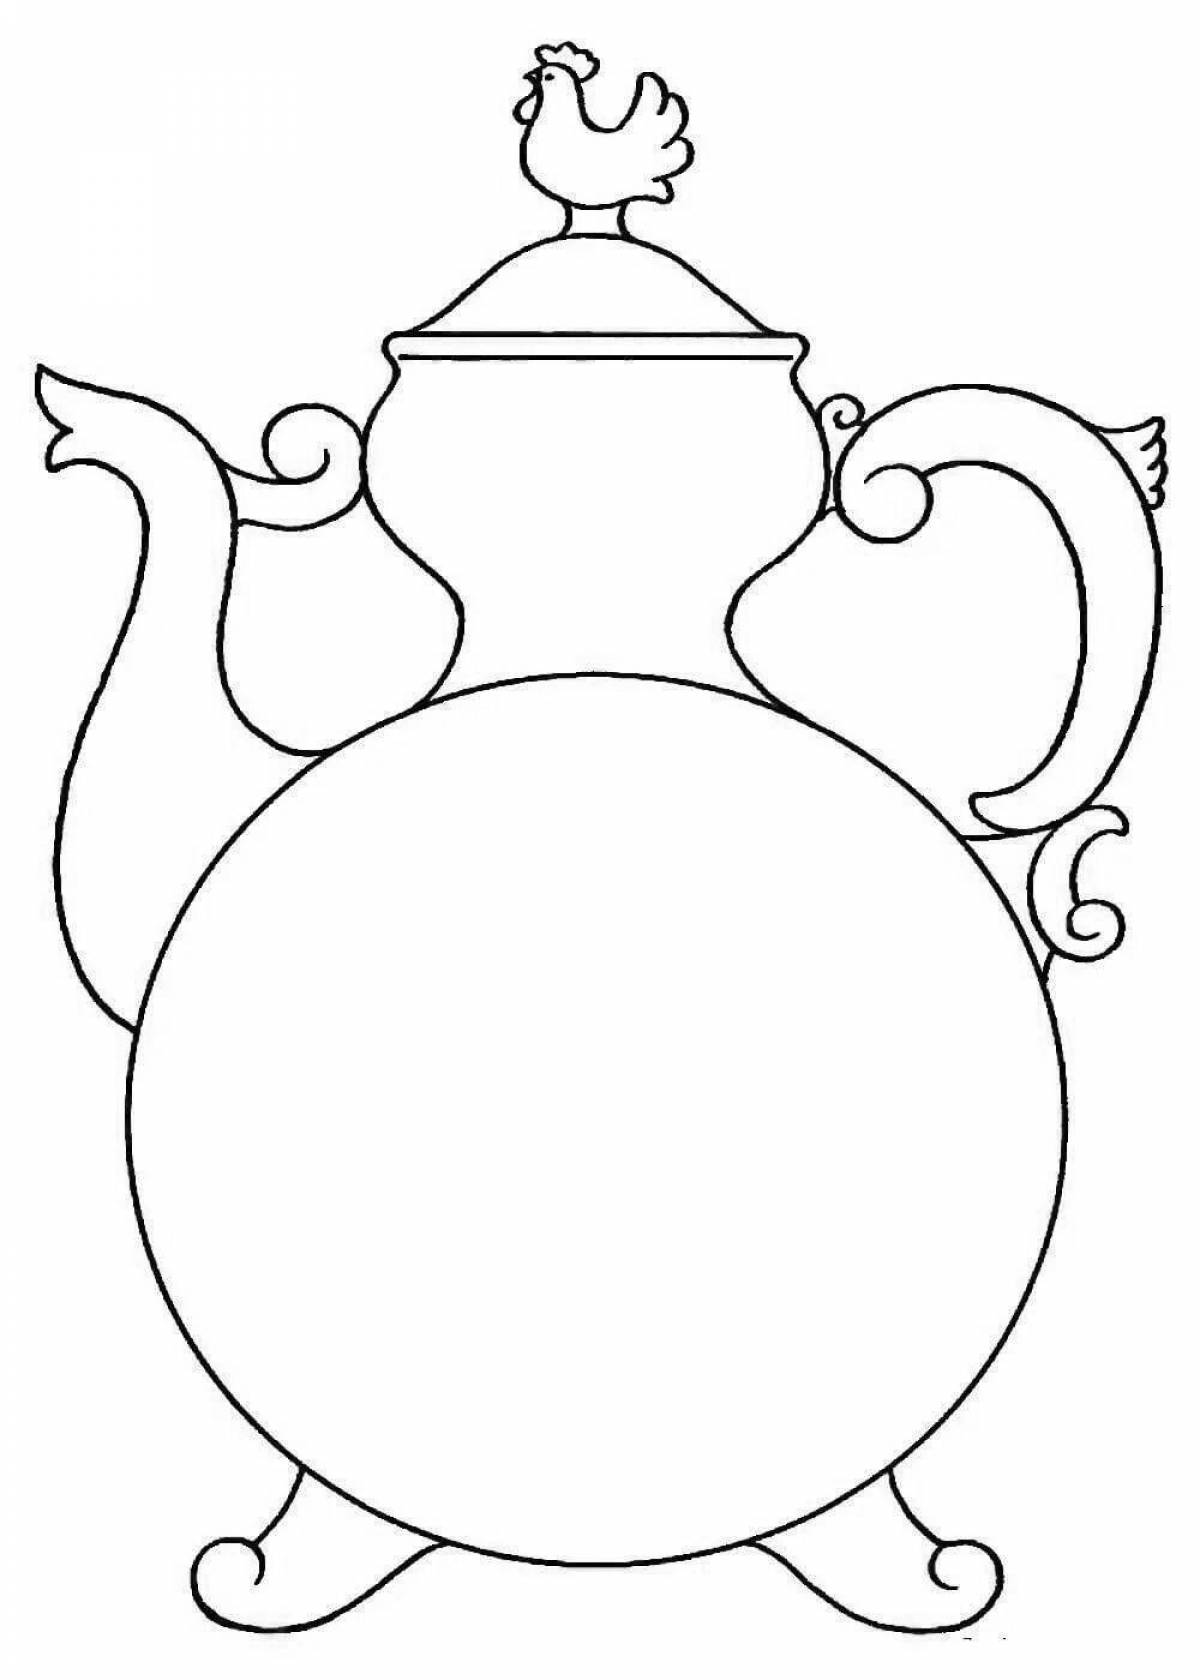 Coloring Gzhel with a radiant jug